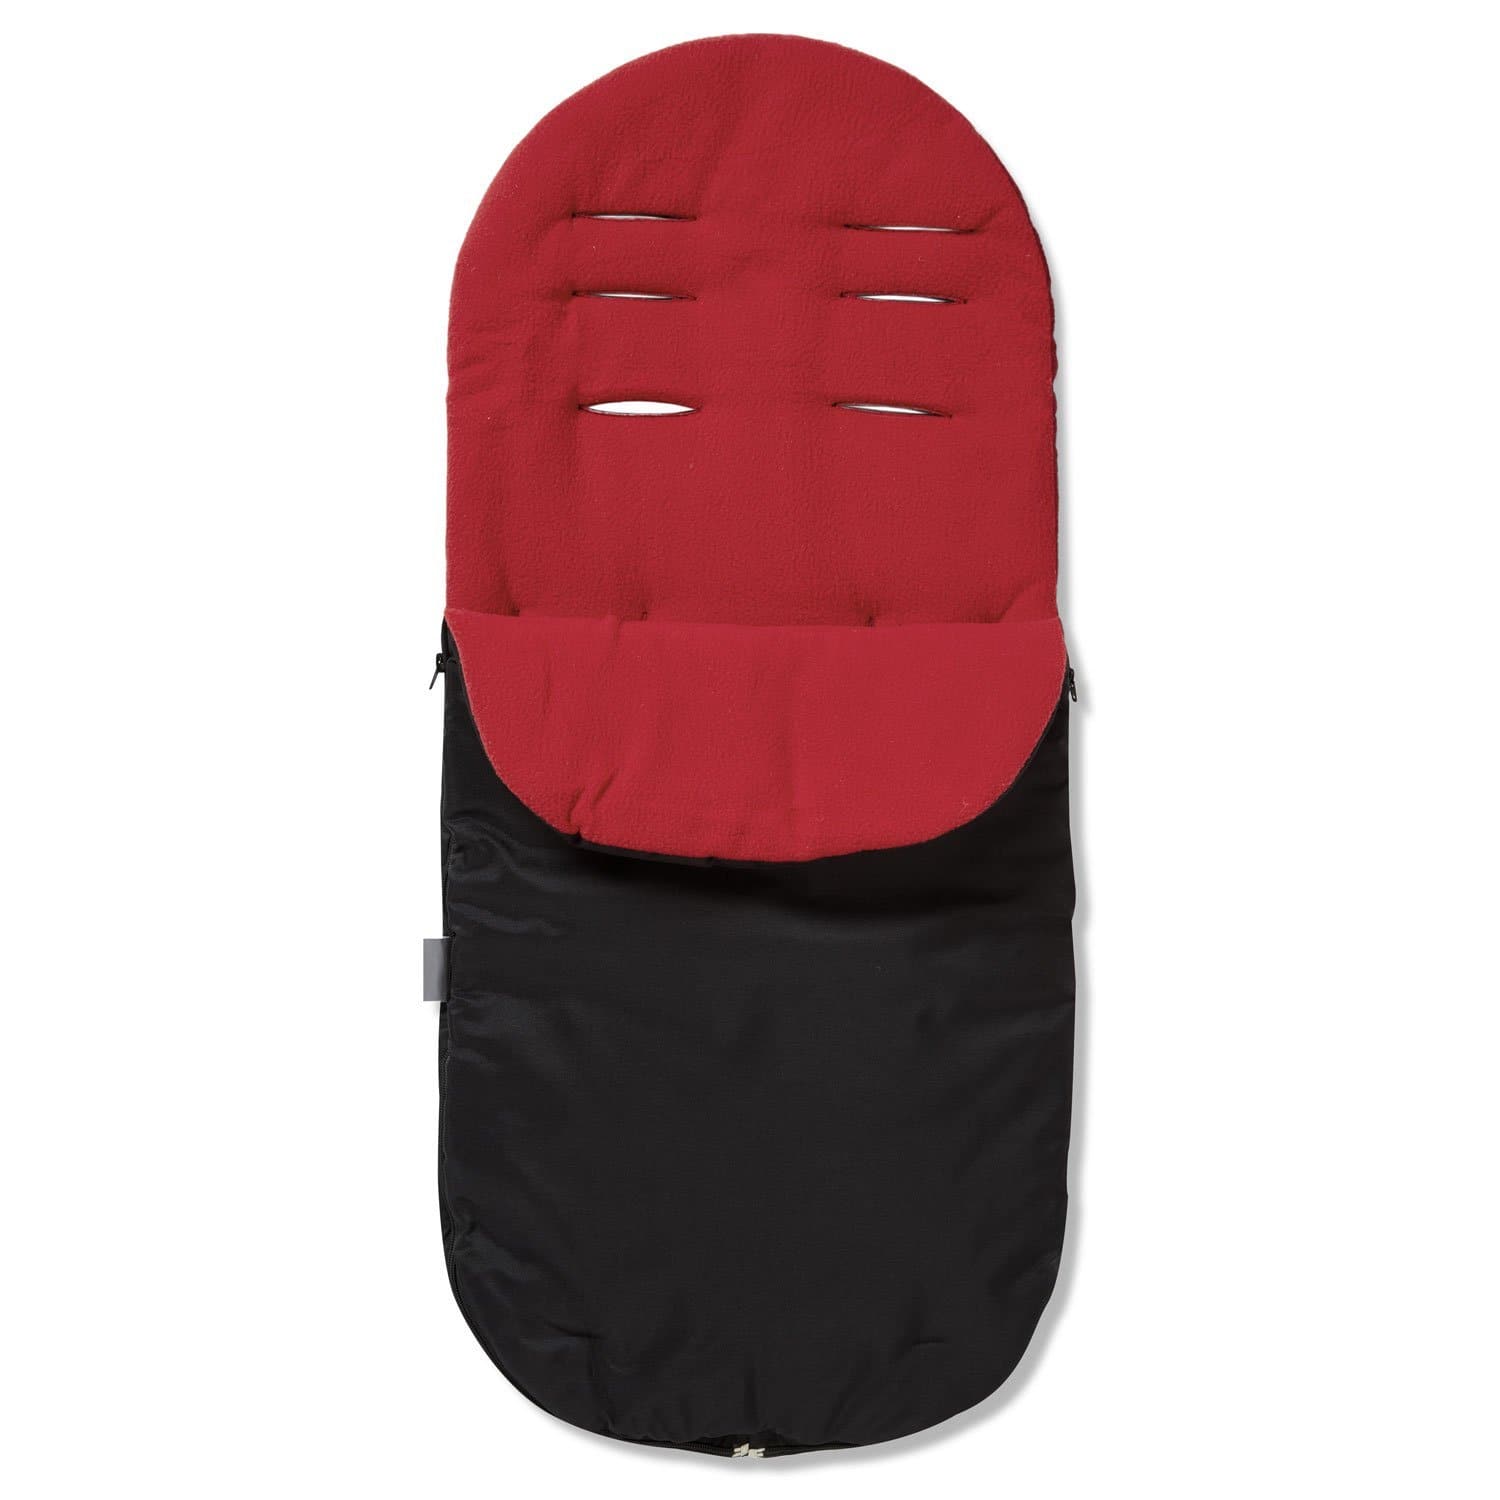 Footmuff / Cosy Toes Compatible with Cosatto - Red / Fits All Models | For Your Little One